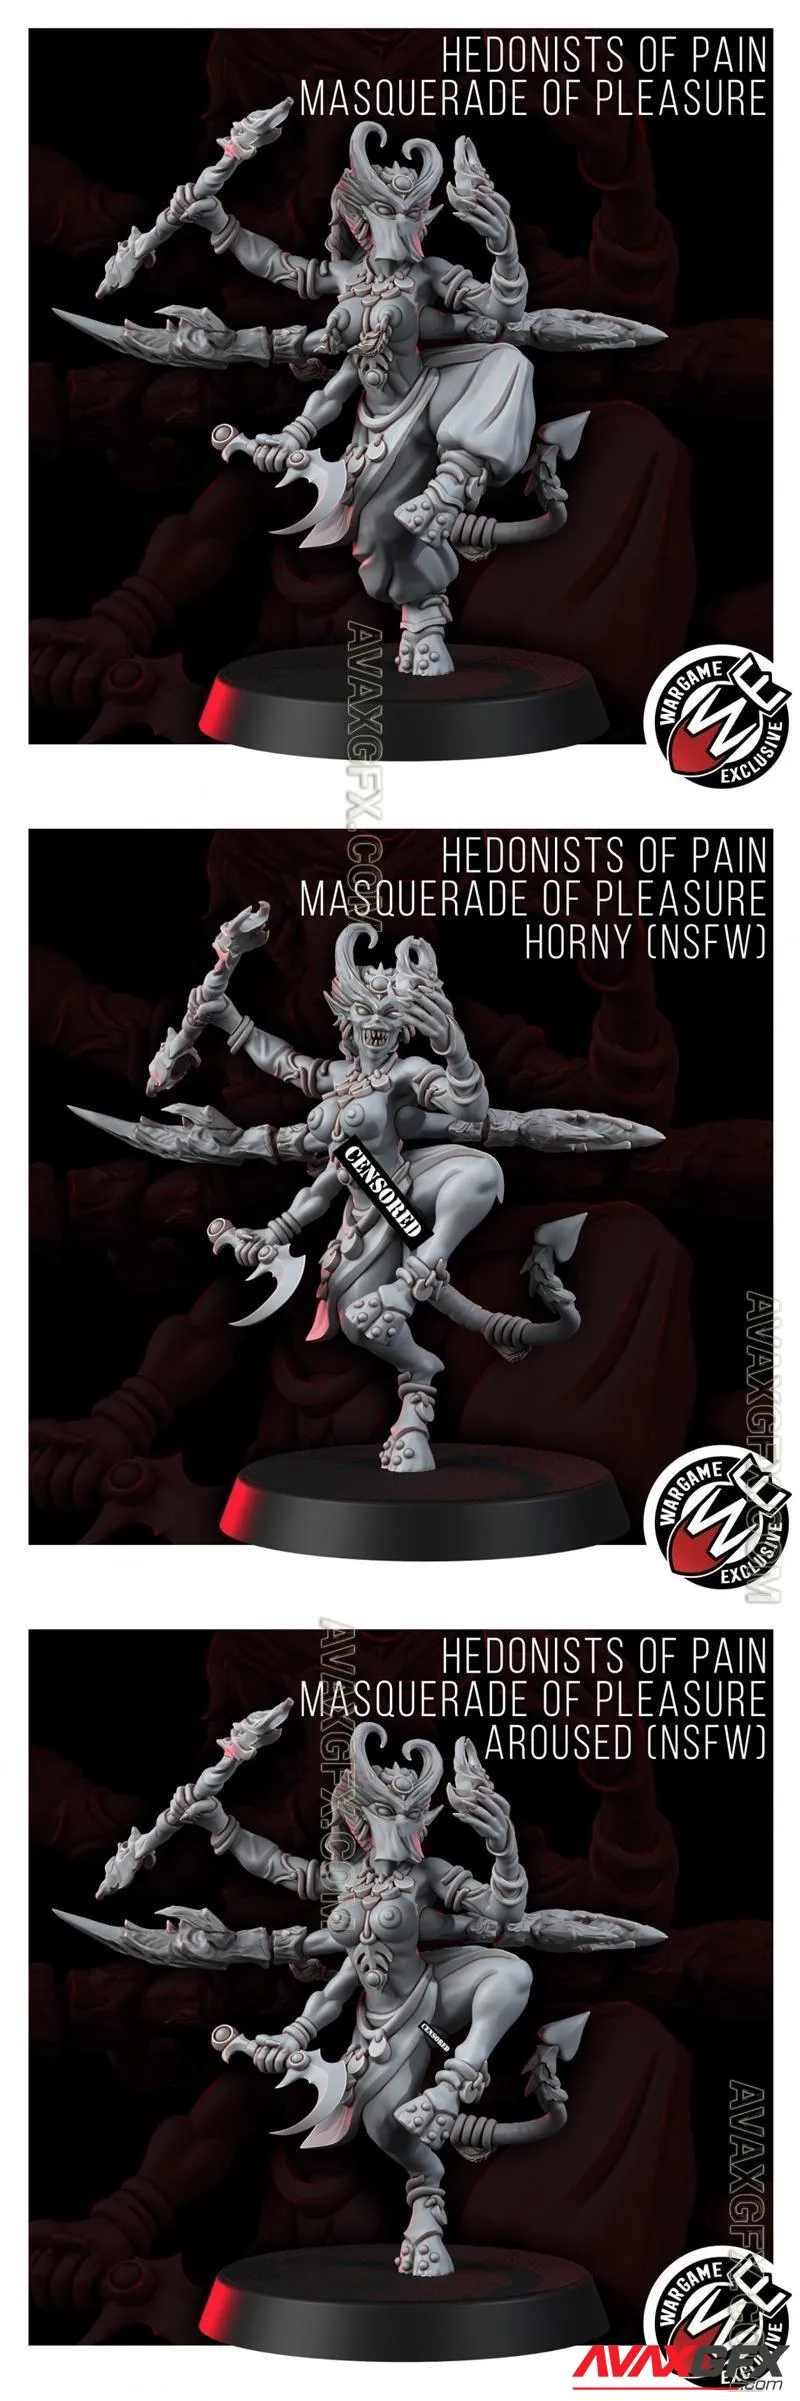 Hedonists Of Pain Masquerade Of Pleasure and Aroused and Horny - STL 3D Model